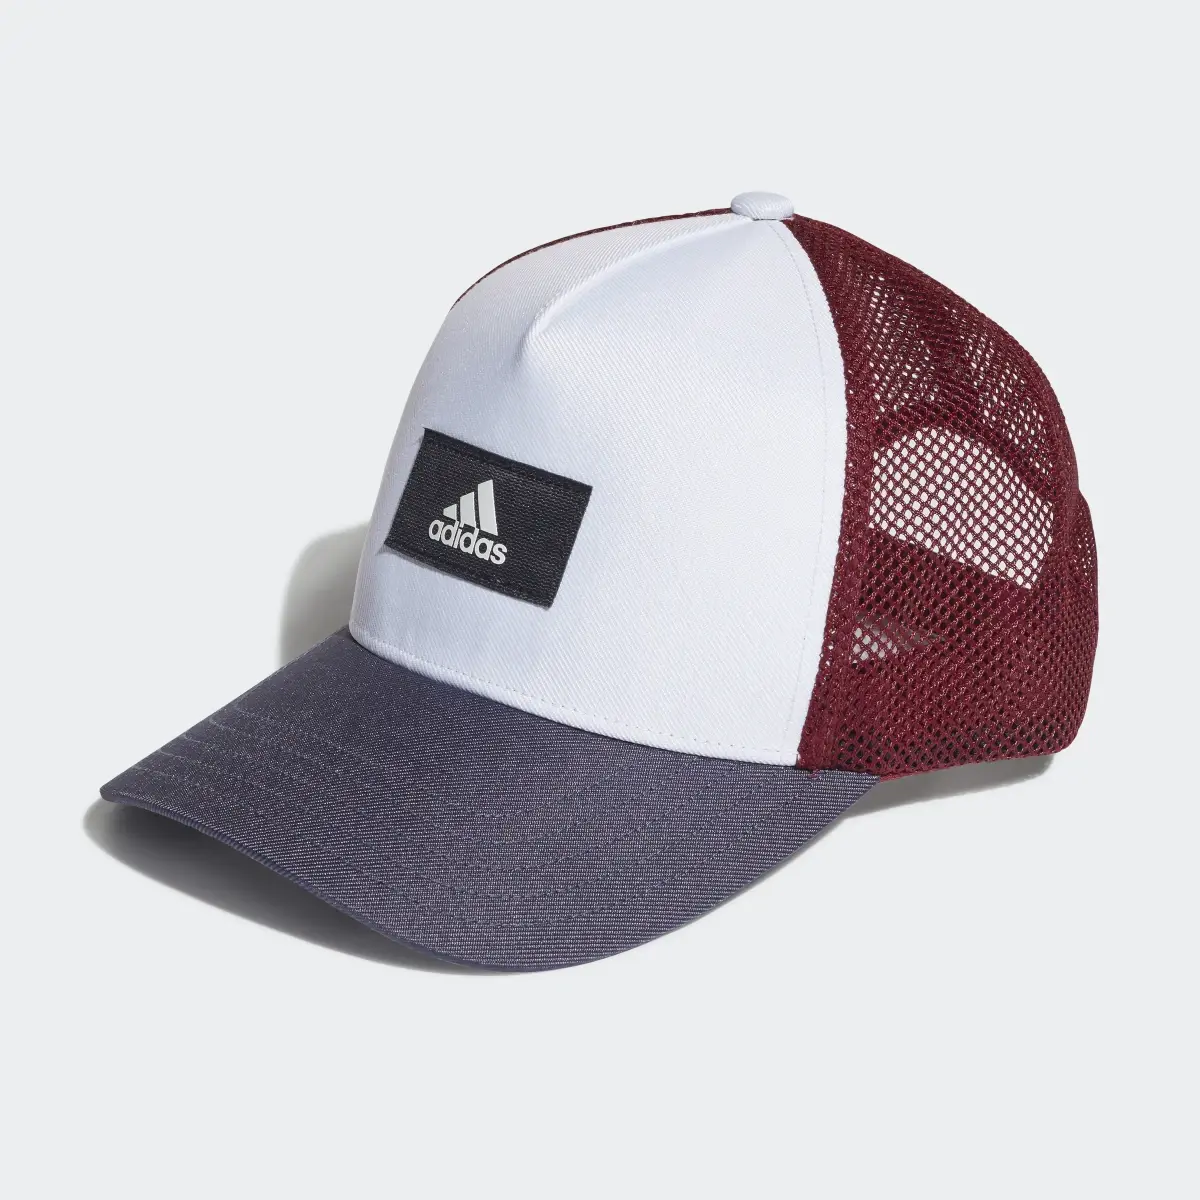 Adidas Casquette Snapback Curved Trucker. 2